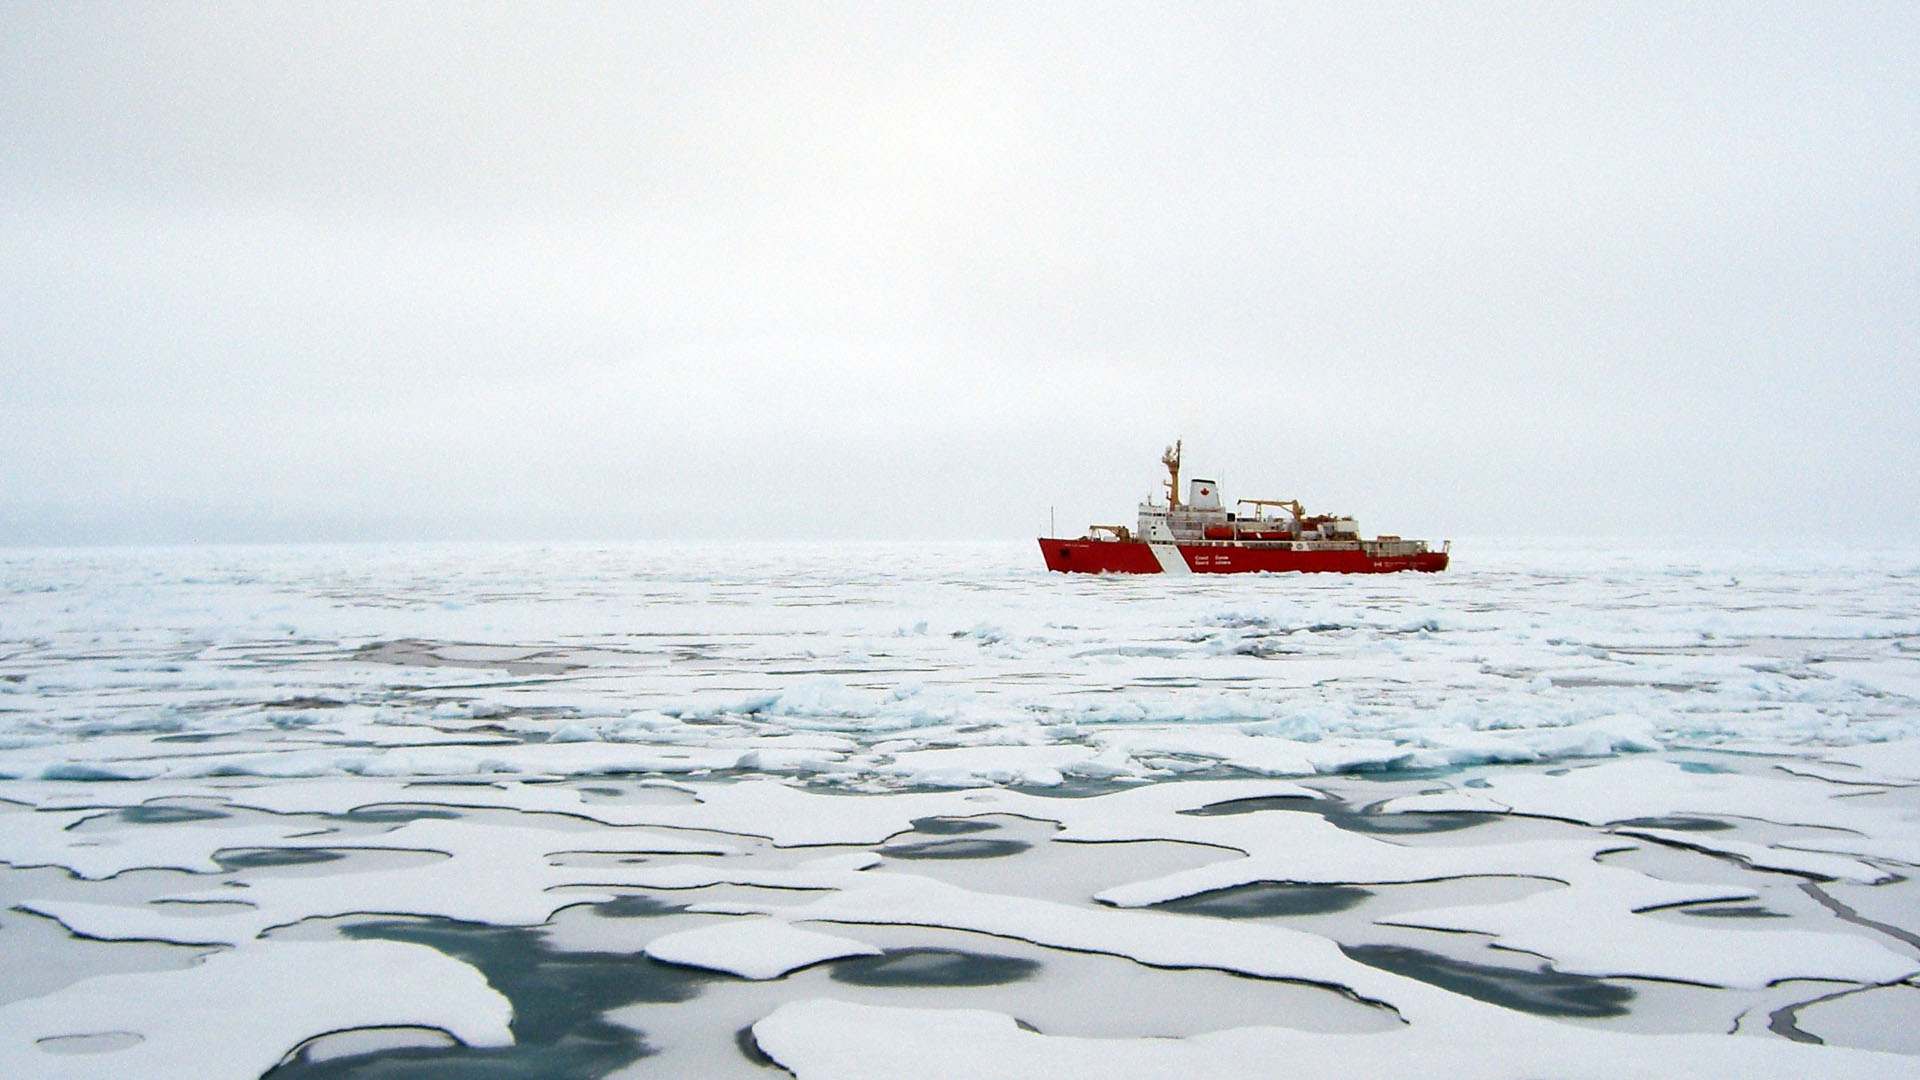 Polar Code Service to optimize marine navigation in the Arctic Antarctic waters